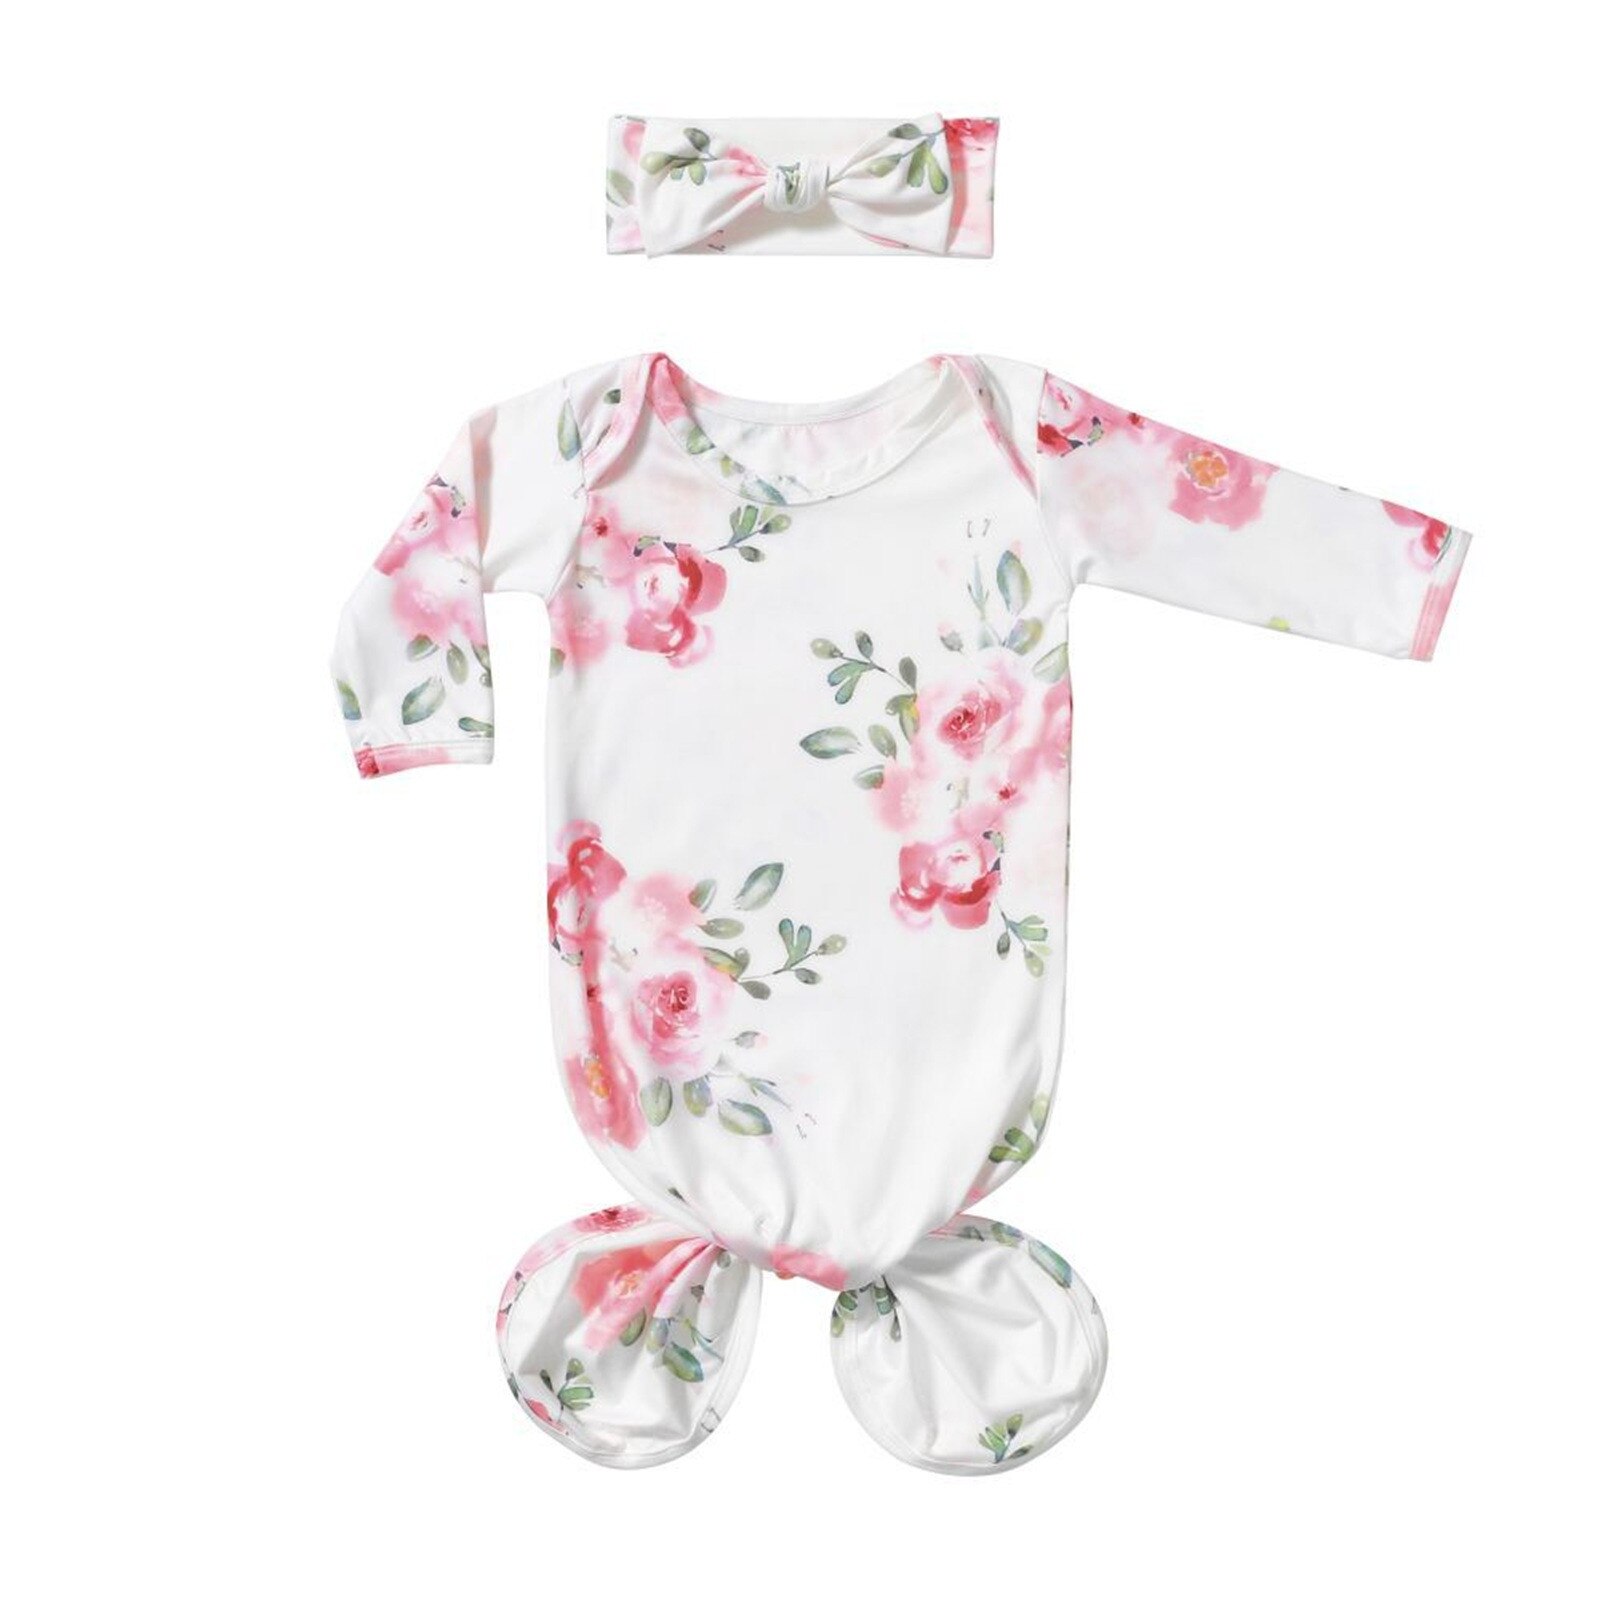 Baby Infant Coming Home Outfit Knotted Sleep Gown Sleepwear Baby Knot Floral Long Sleeve Sleeping Receiving Blankets